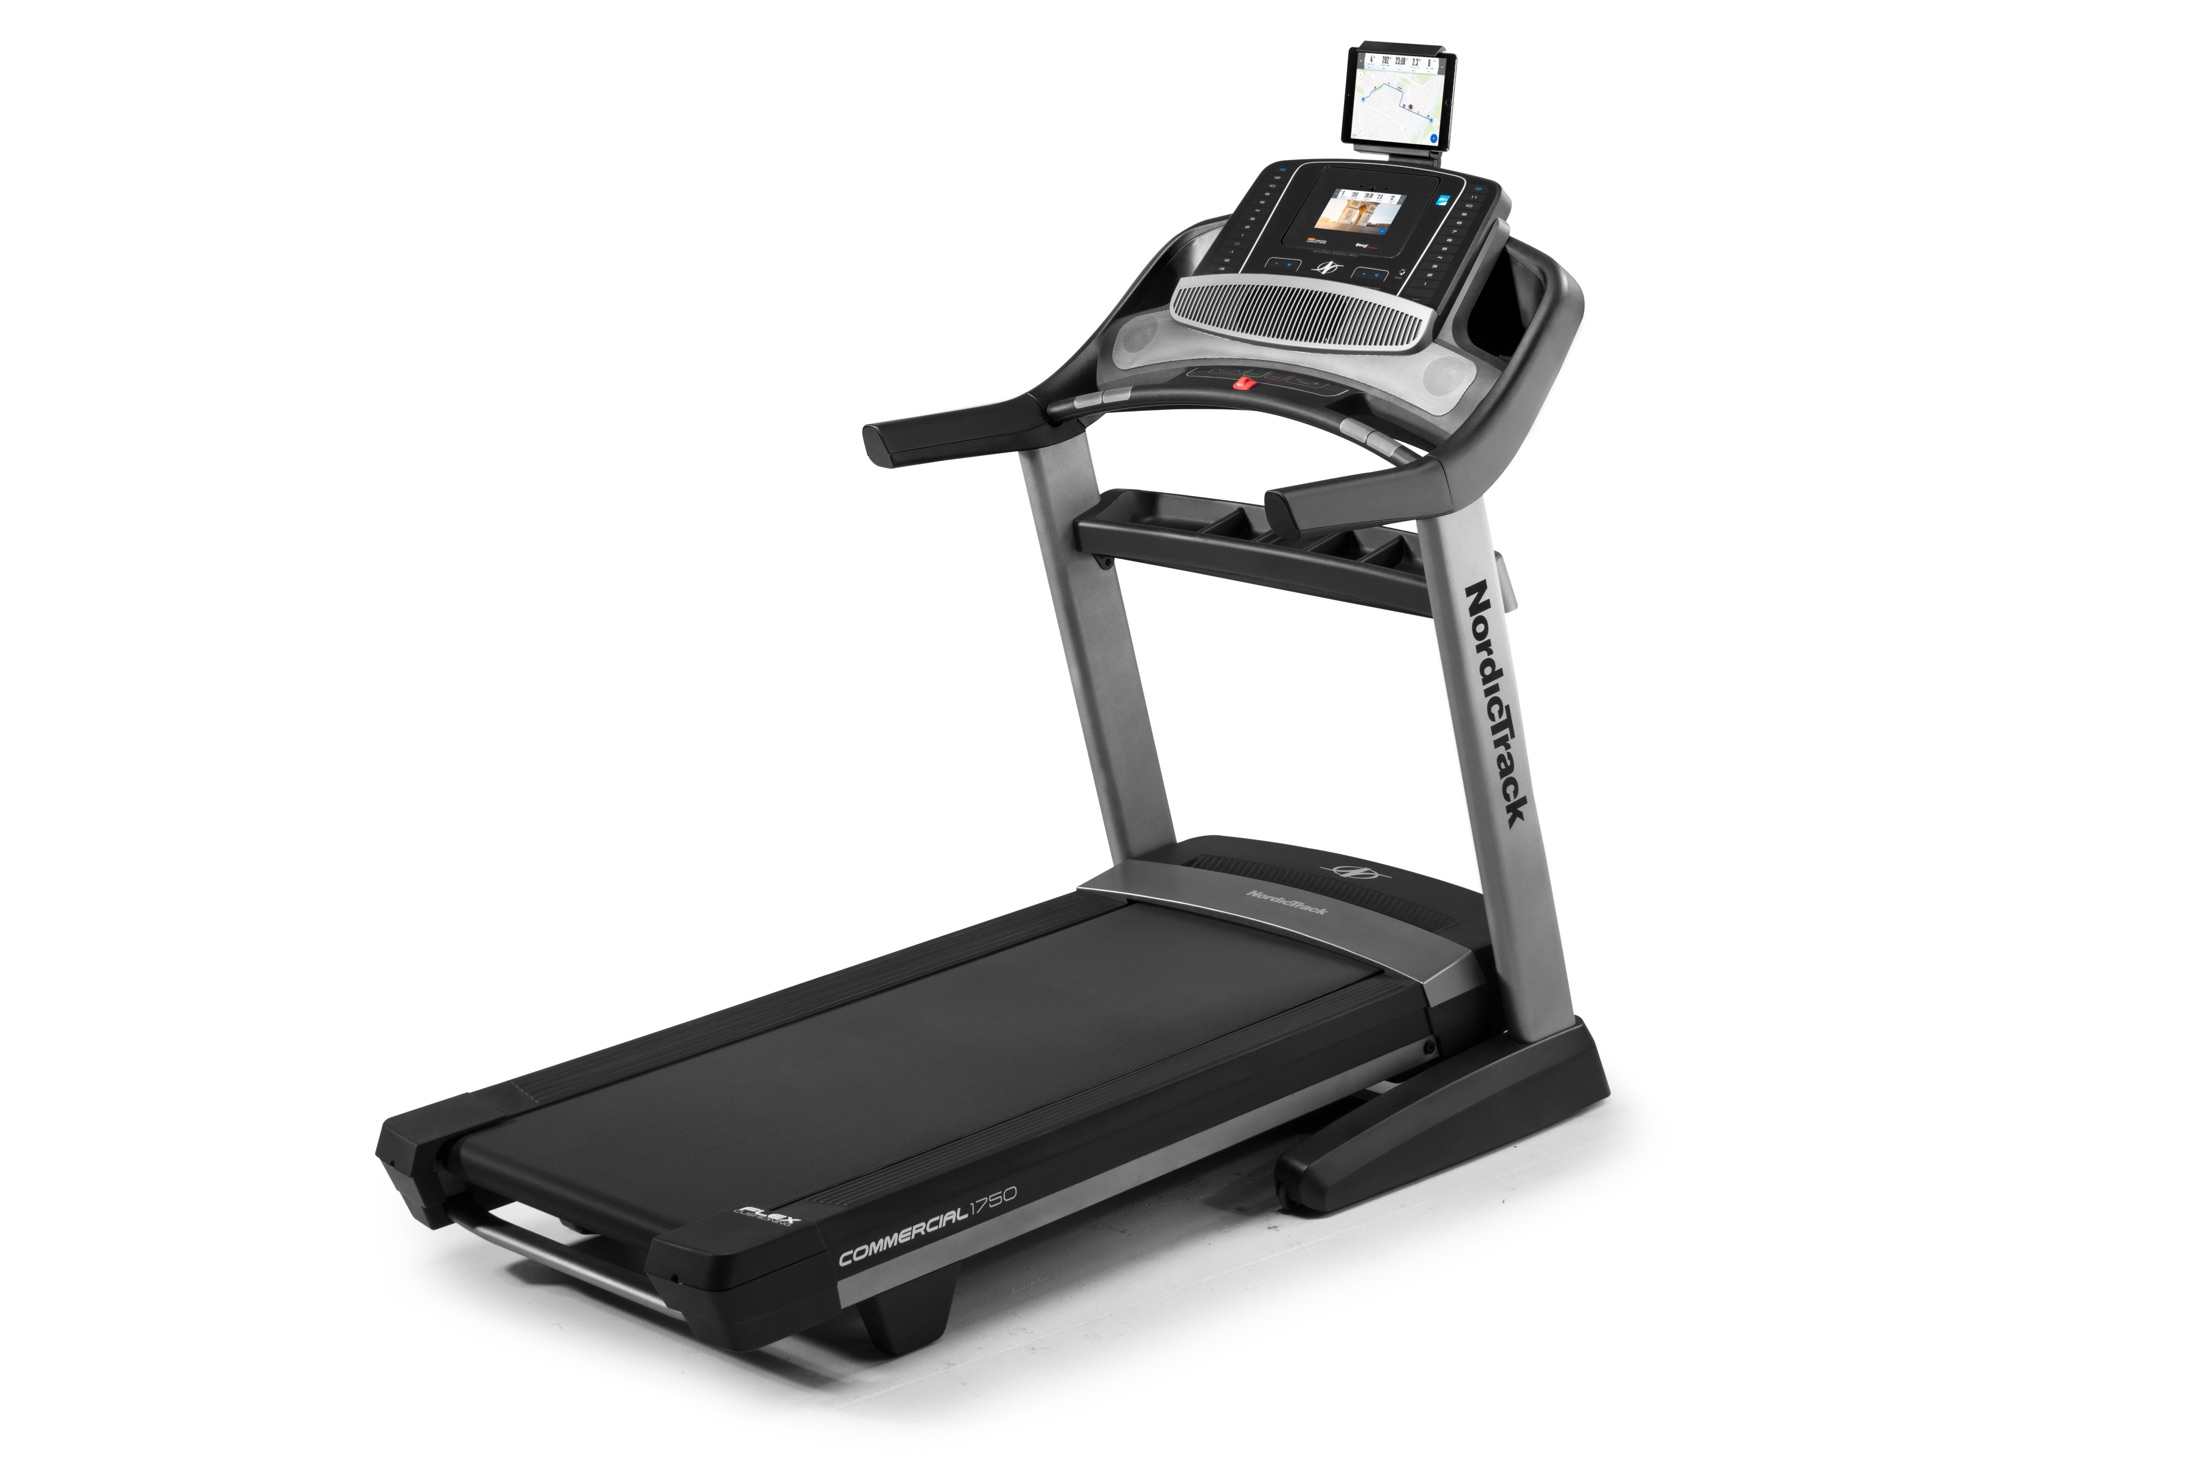 NordicTrack Commercial 1750 - 2021 Model With iFit & Large Touch Screen